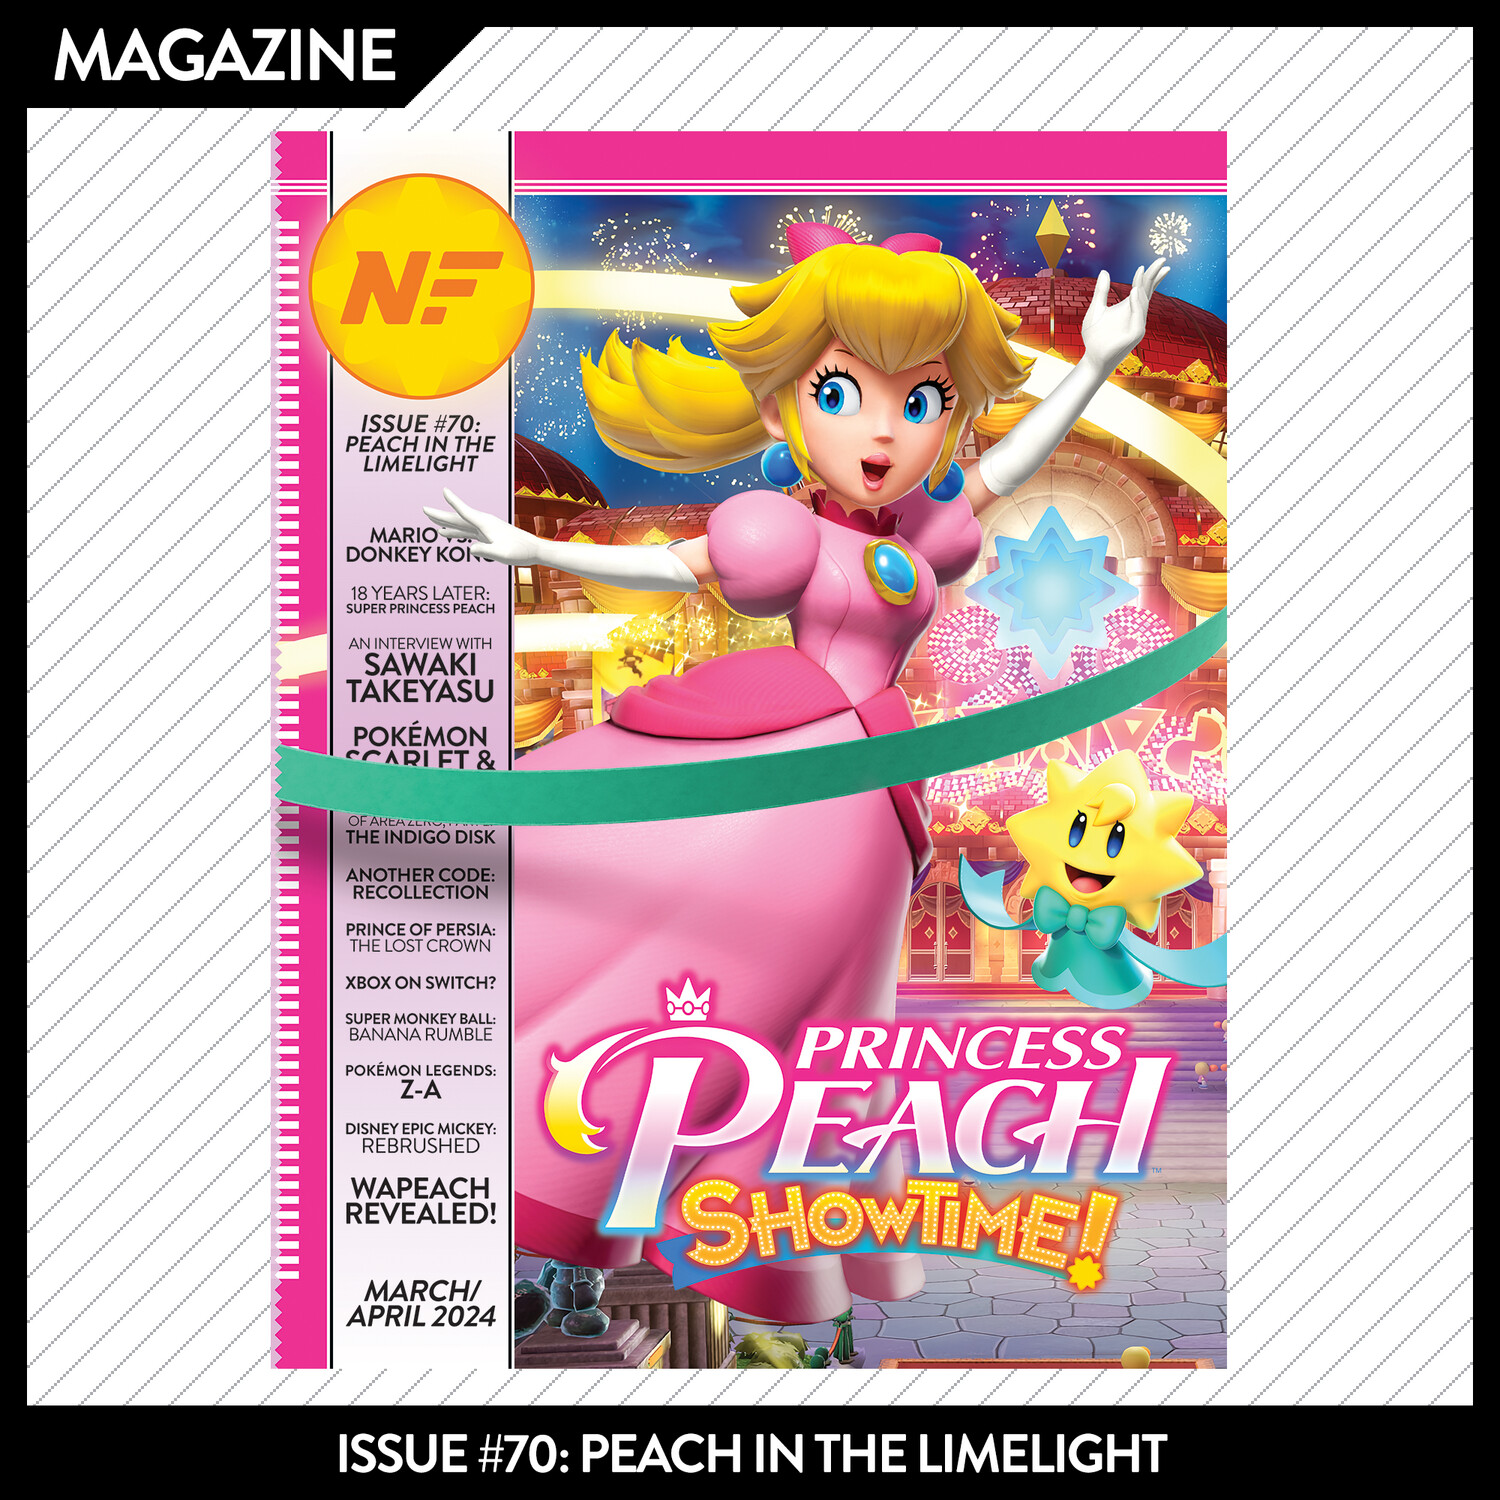 Issue #70: Peach in the Limelight – March/April 2024